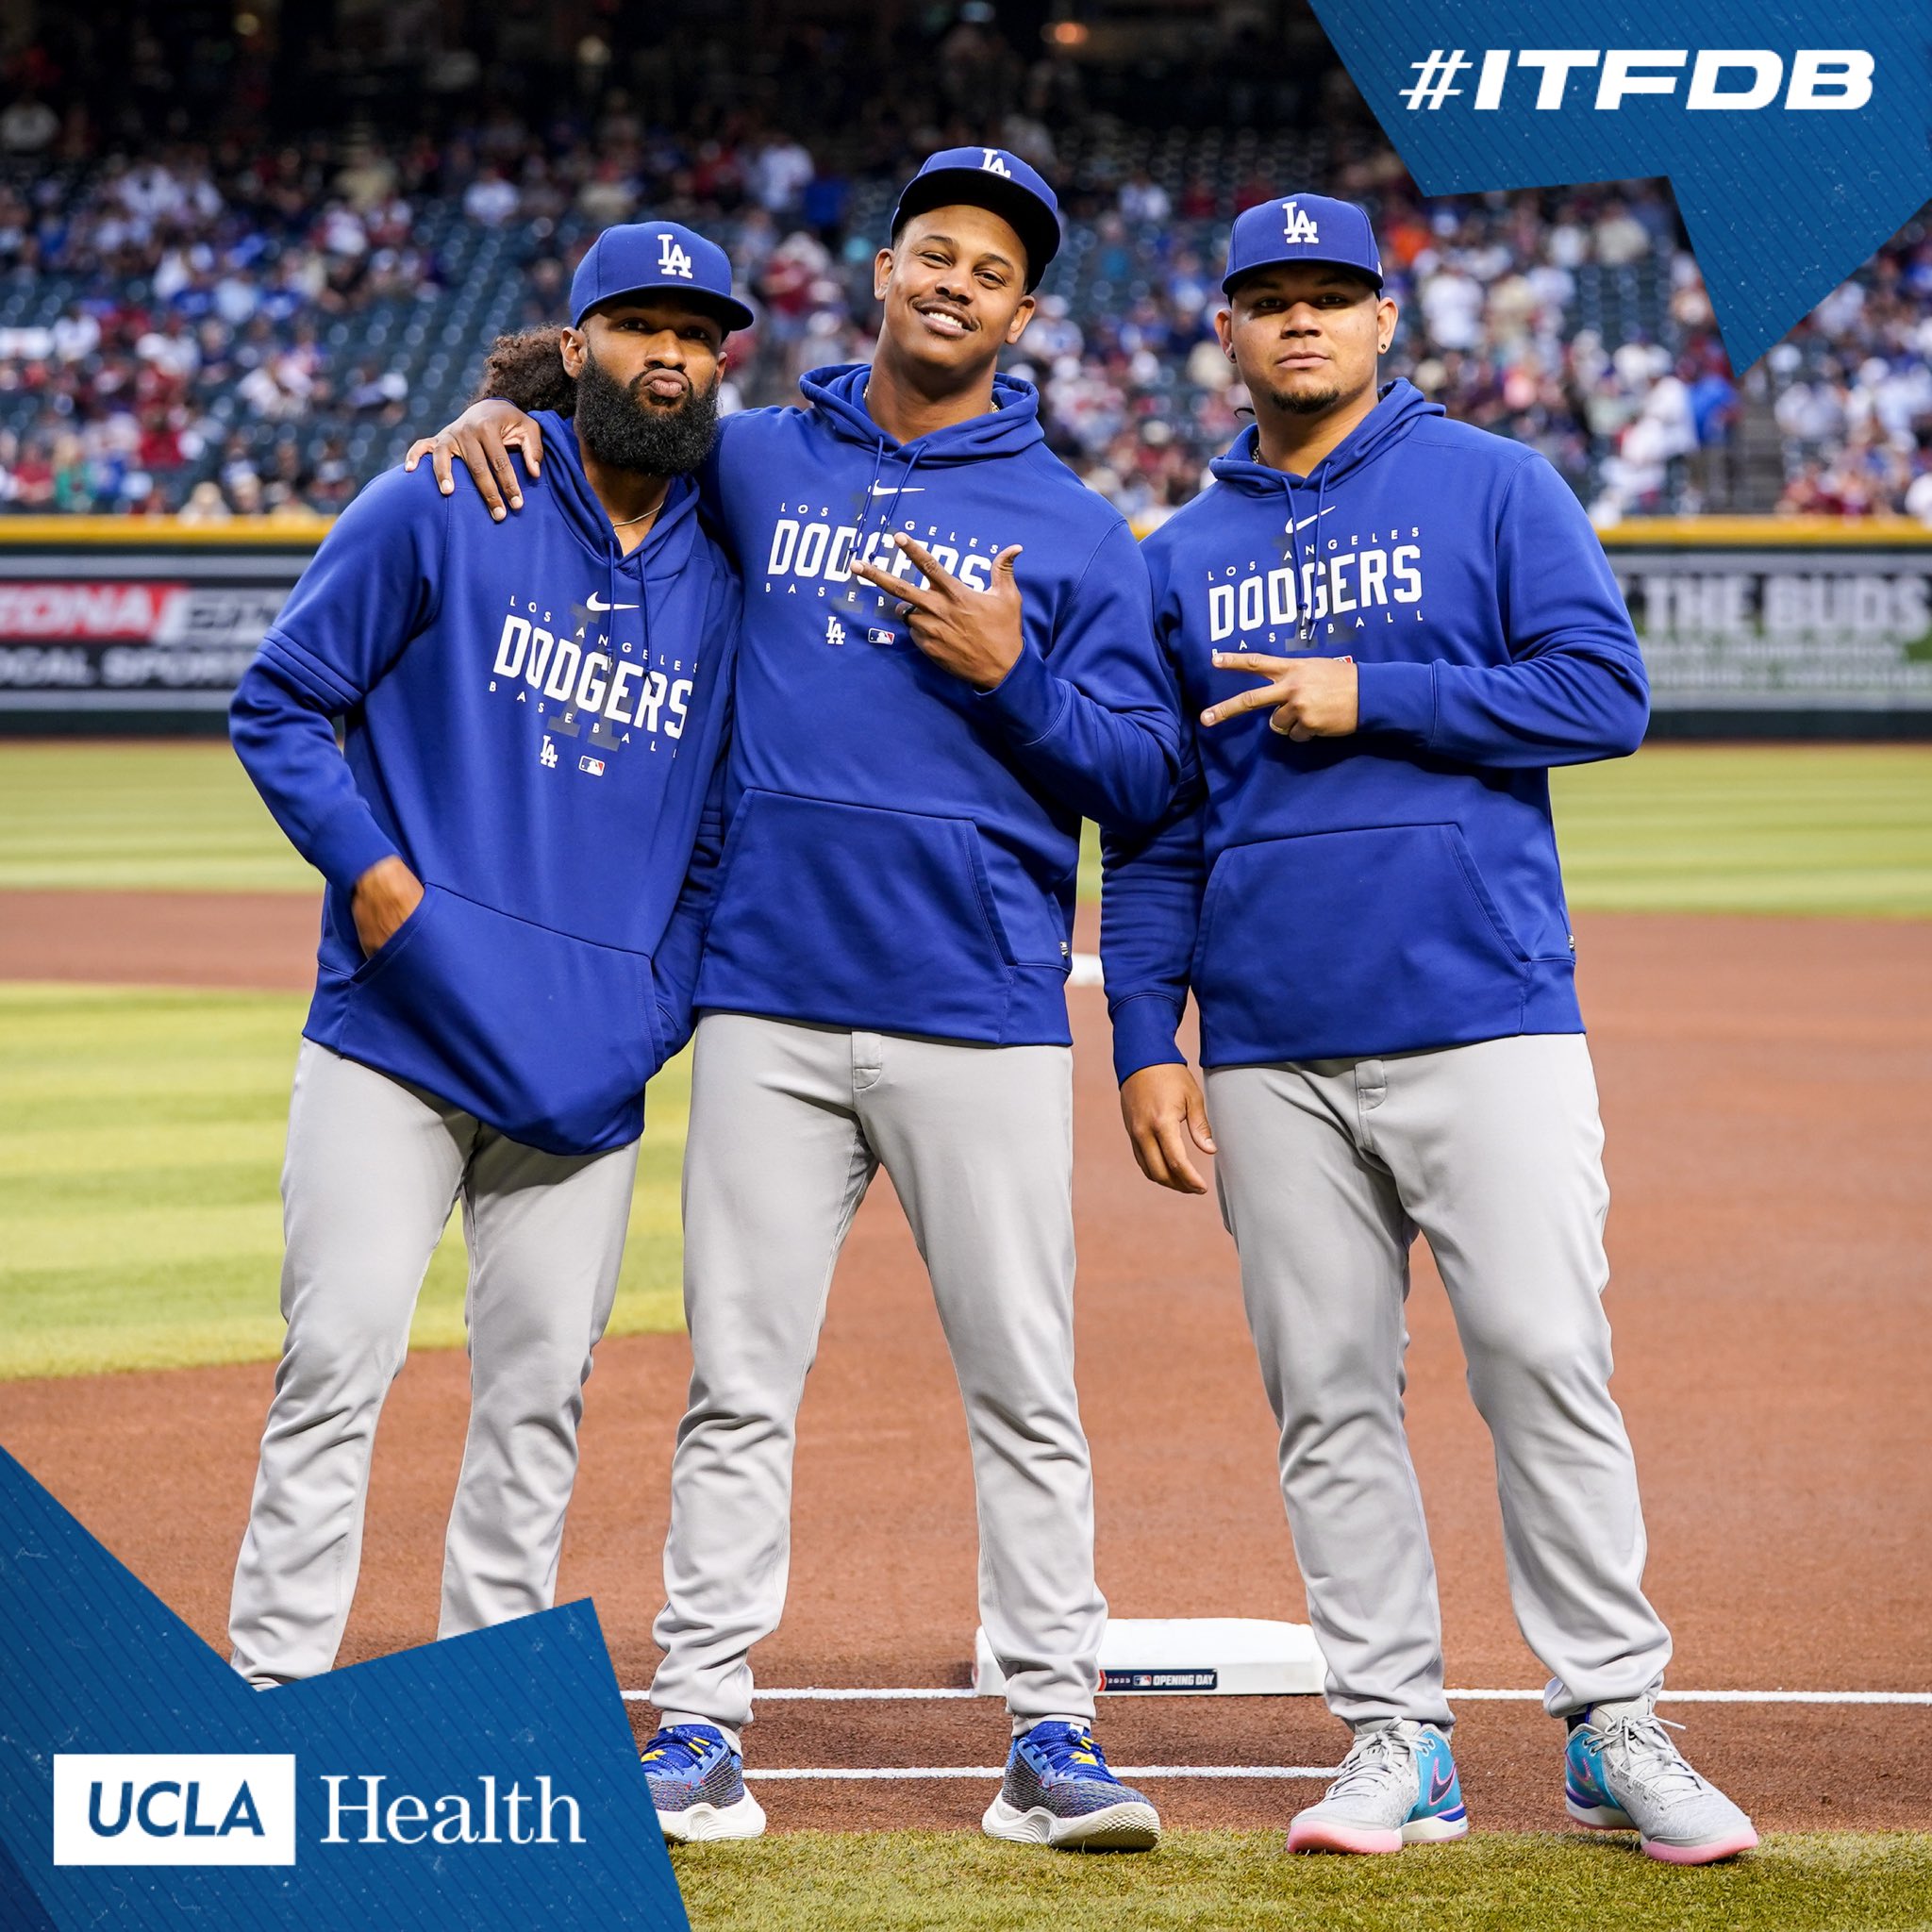 Los Angeles Dodgers on X: #ITFDB presented by @UCLAHealth. https